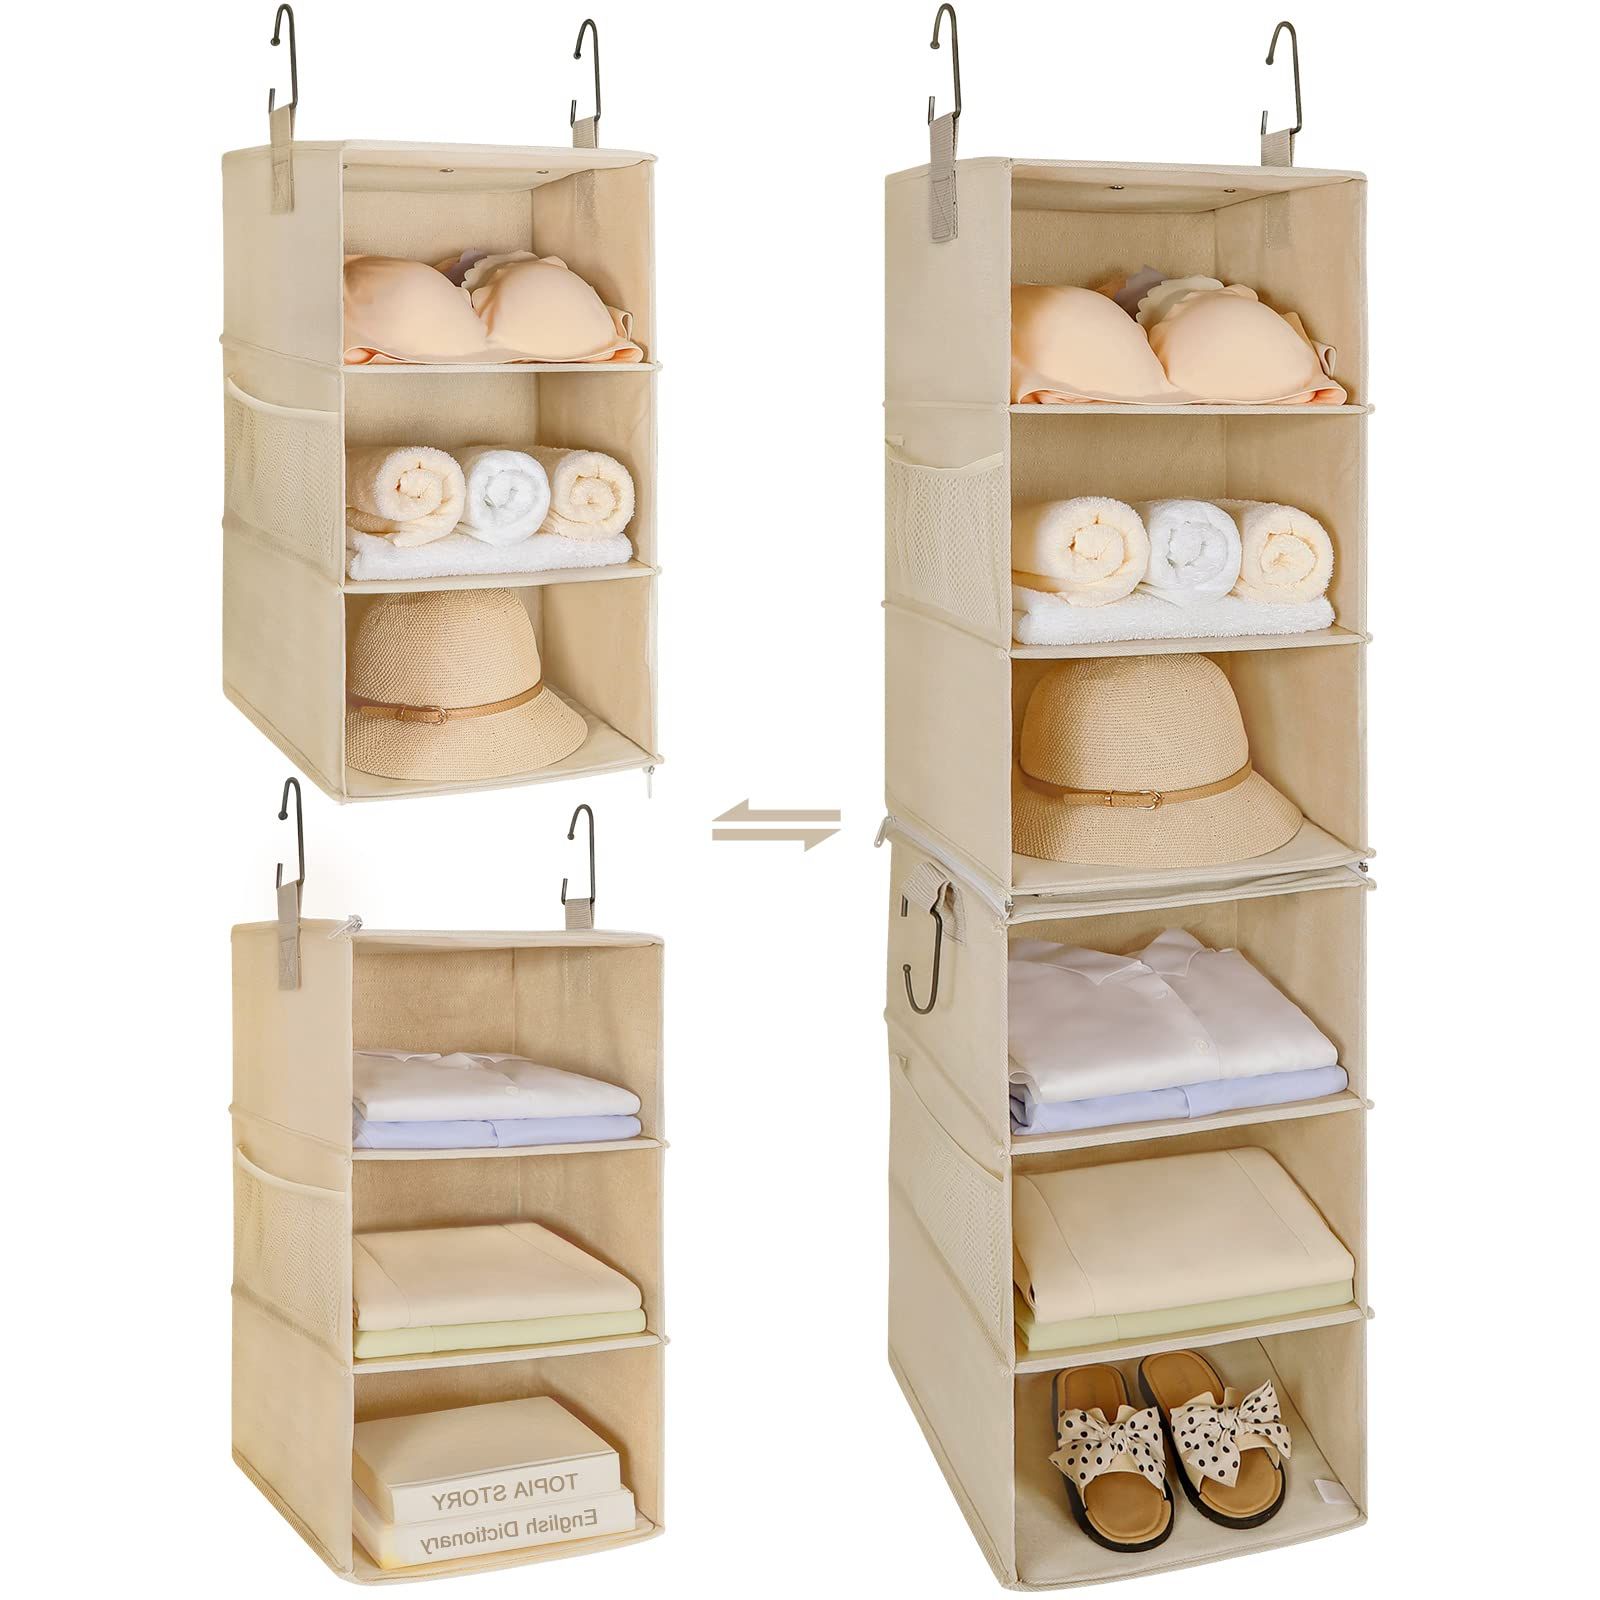 Recent 2 Separable Wardrobes Within Amazon: Topia Home 6 Shelf Hanging Closet Organizer, Two Separable  3 Tier Thickened Fabric Hanging Closet Shelves With Mesh Pockets,  Collapsible Closet Organizers And Storage Organization, Beige : Home &  Kitchen (Photo 6 of 10)